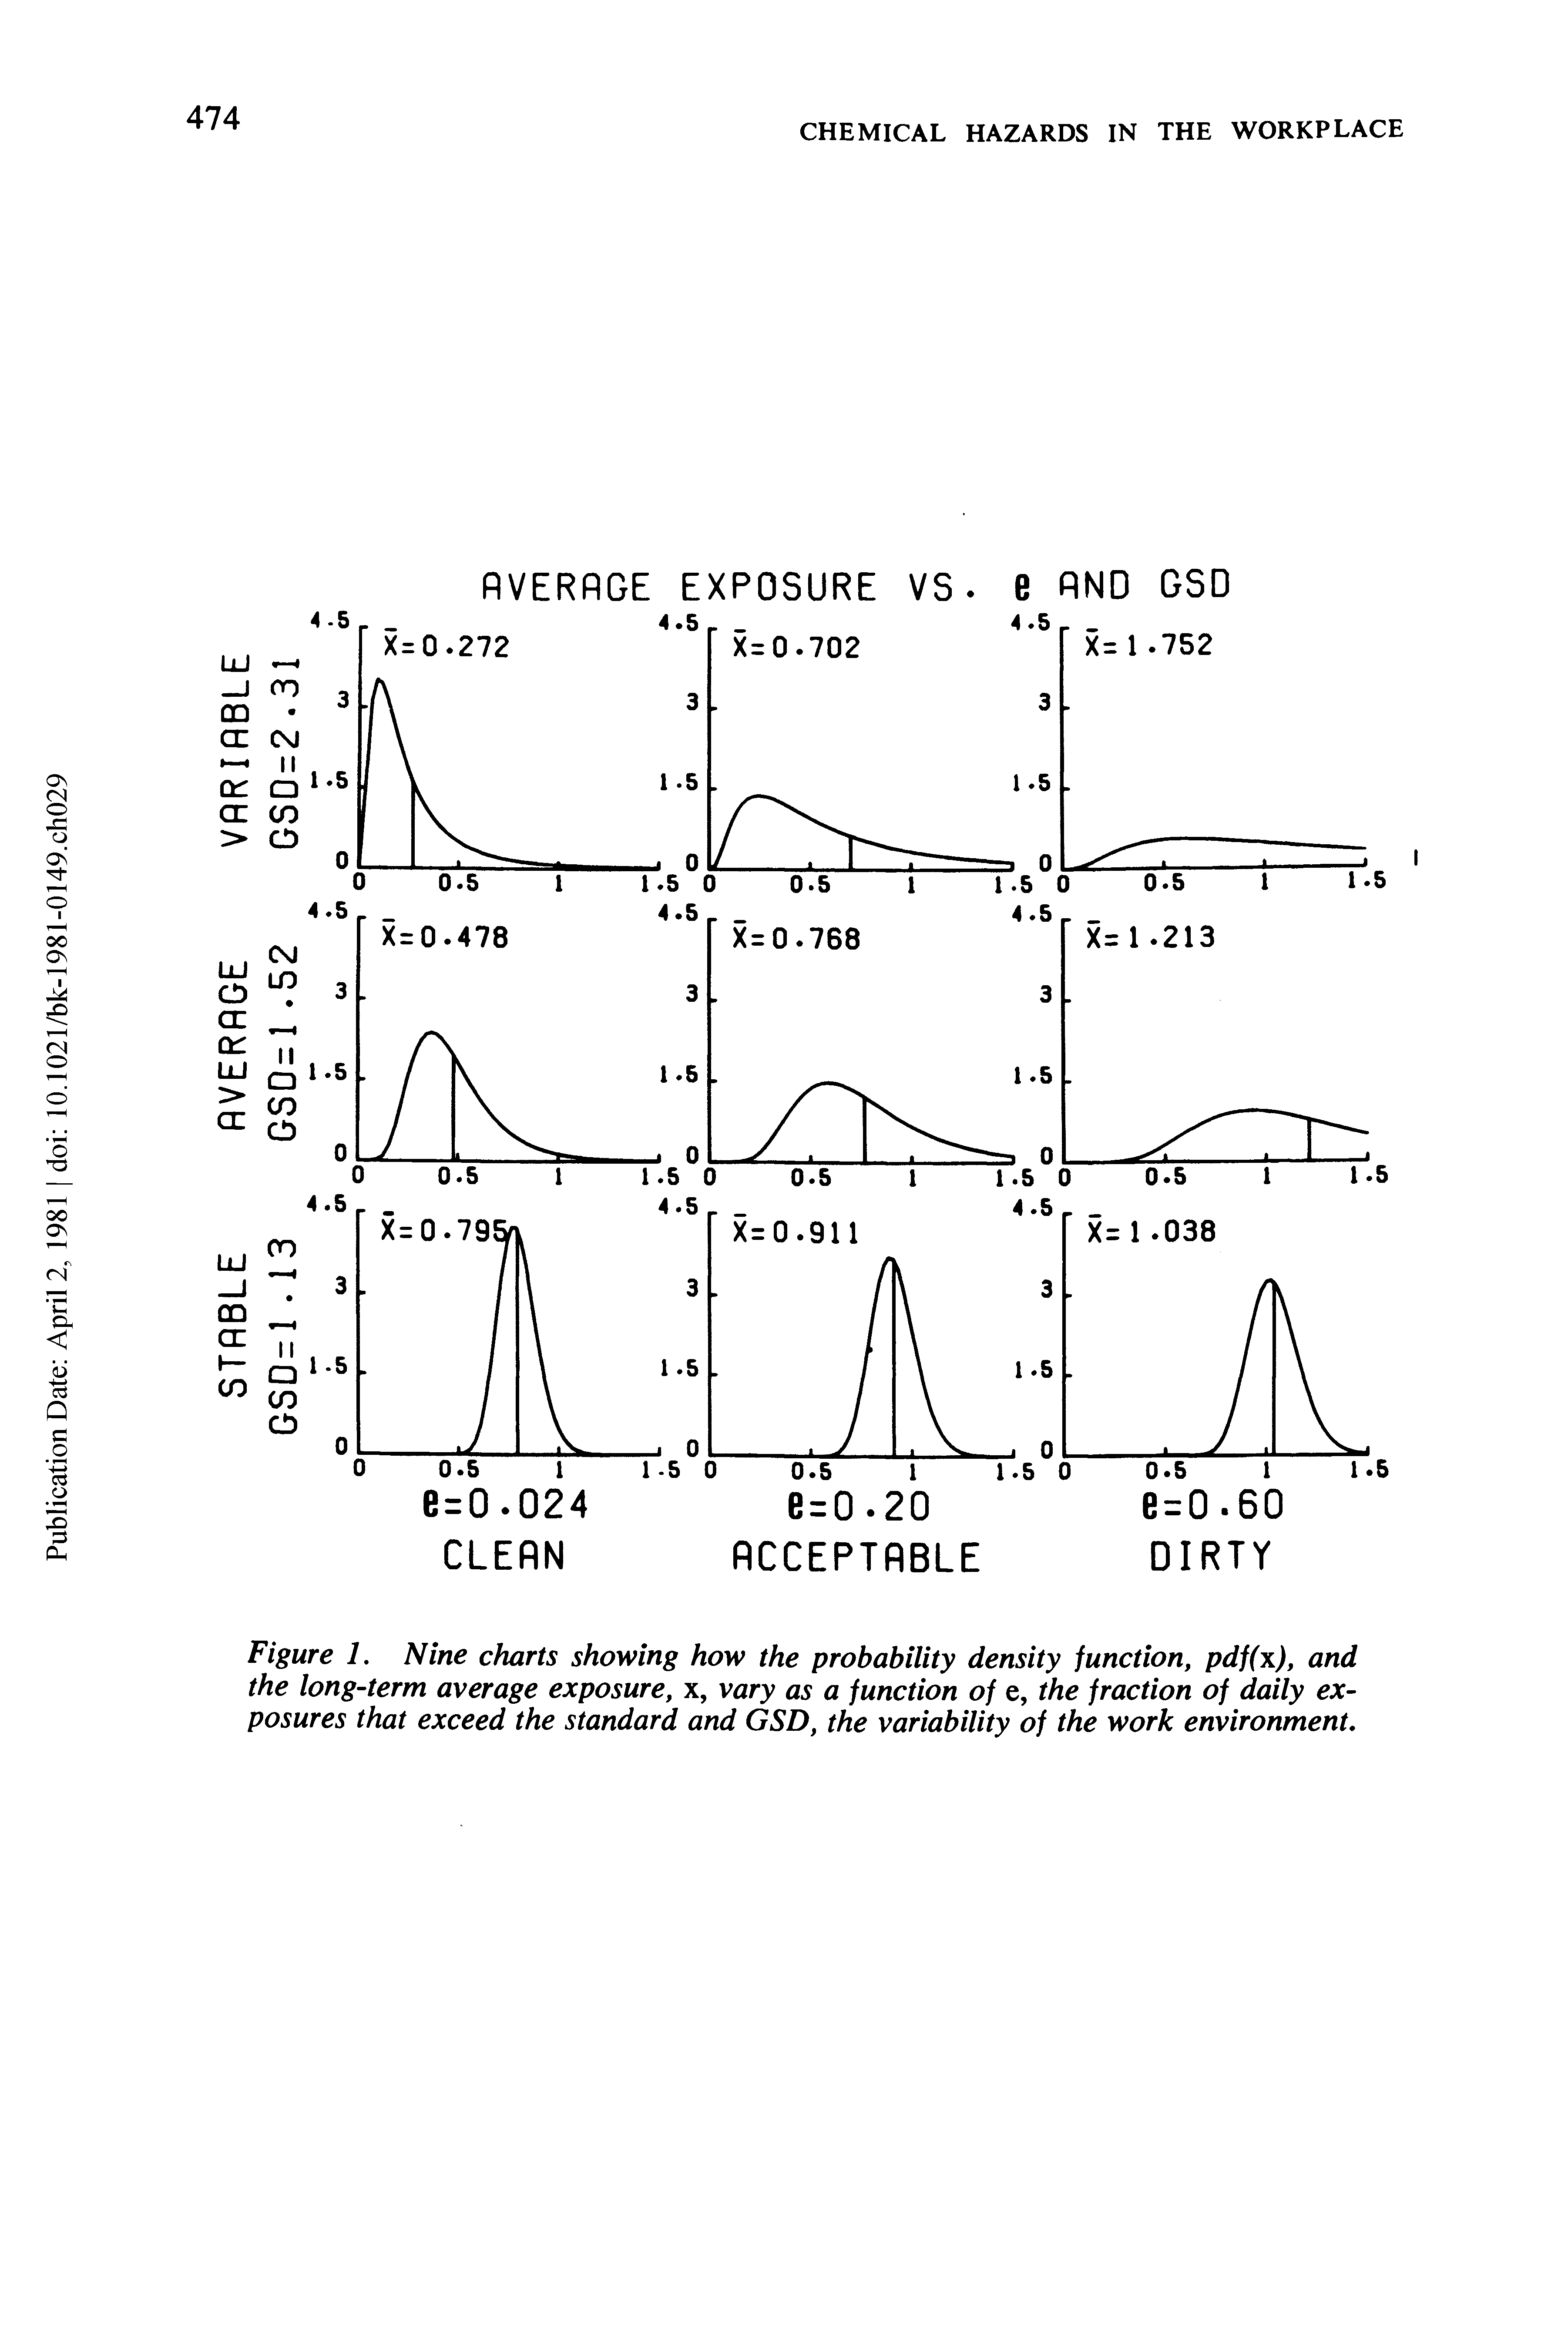 Figure 1. Nine charts showing how the probability density function, pdf(x), and the long-term average exposure, x, vary as a function of e, the fraction of daily exposures that exceed the standard and GSD, the variability of the work environment.